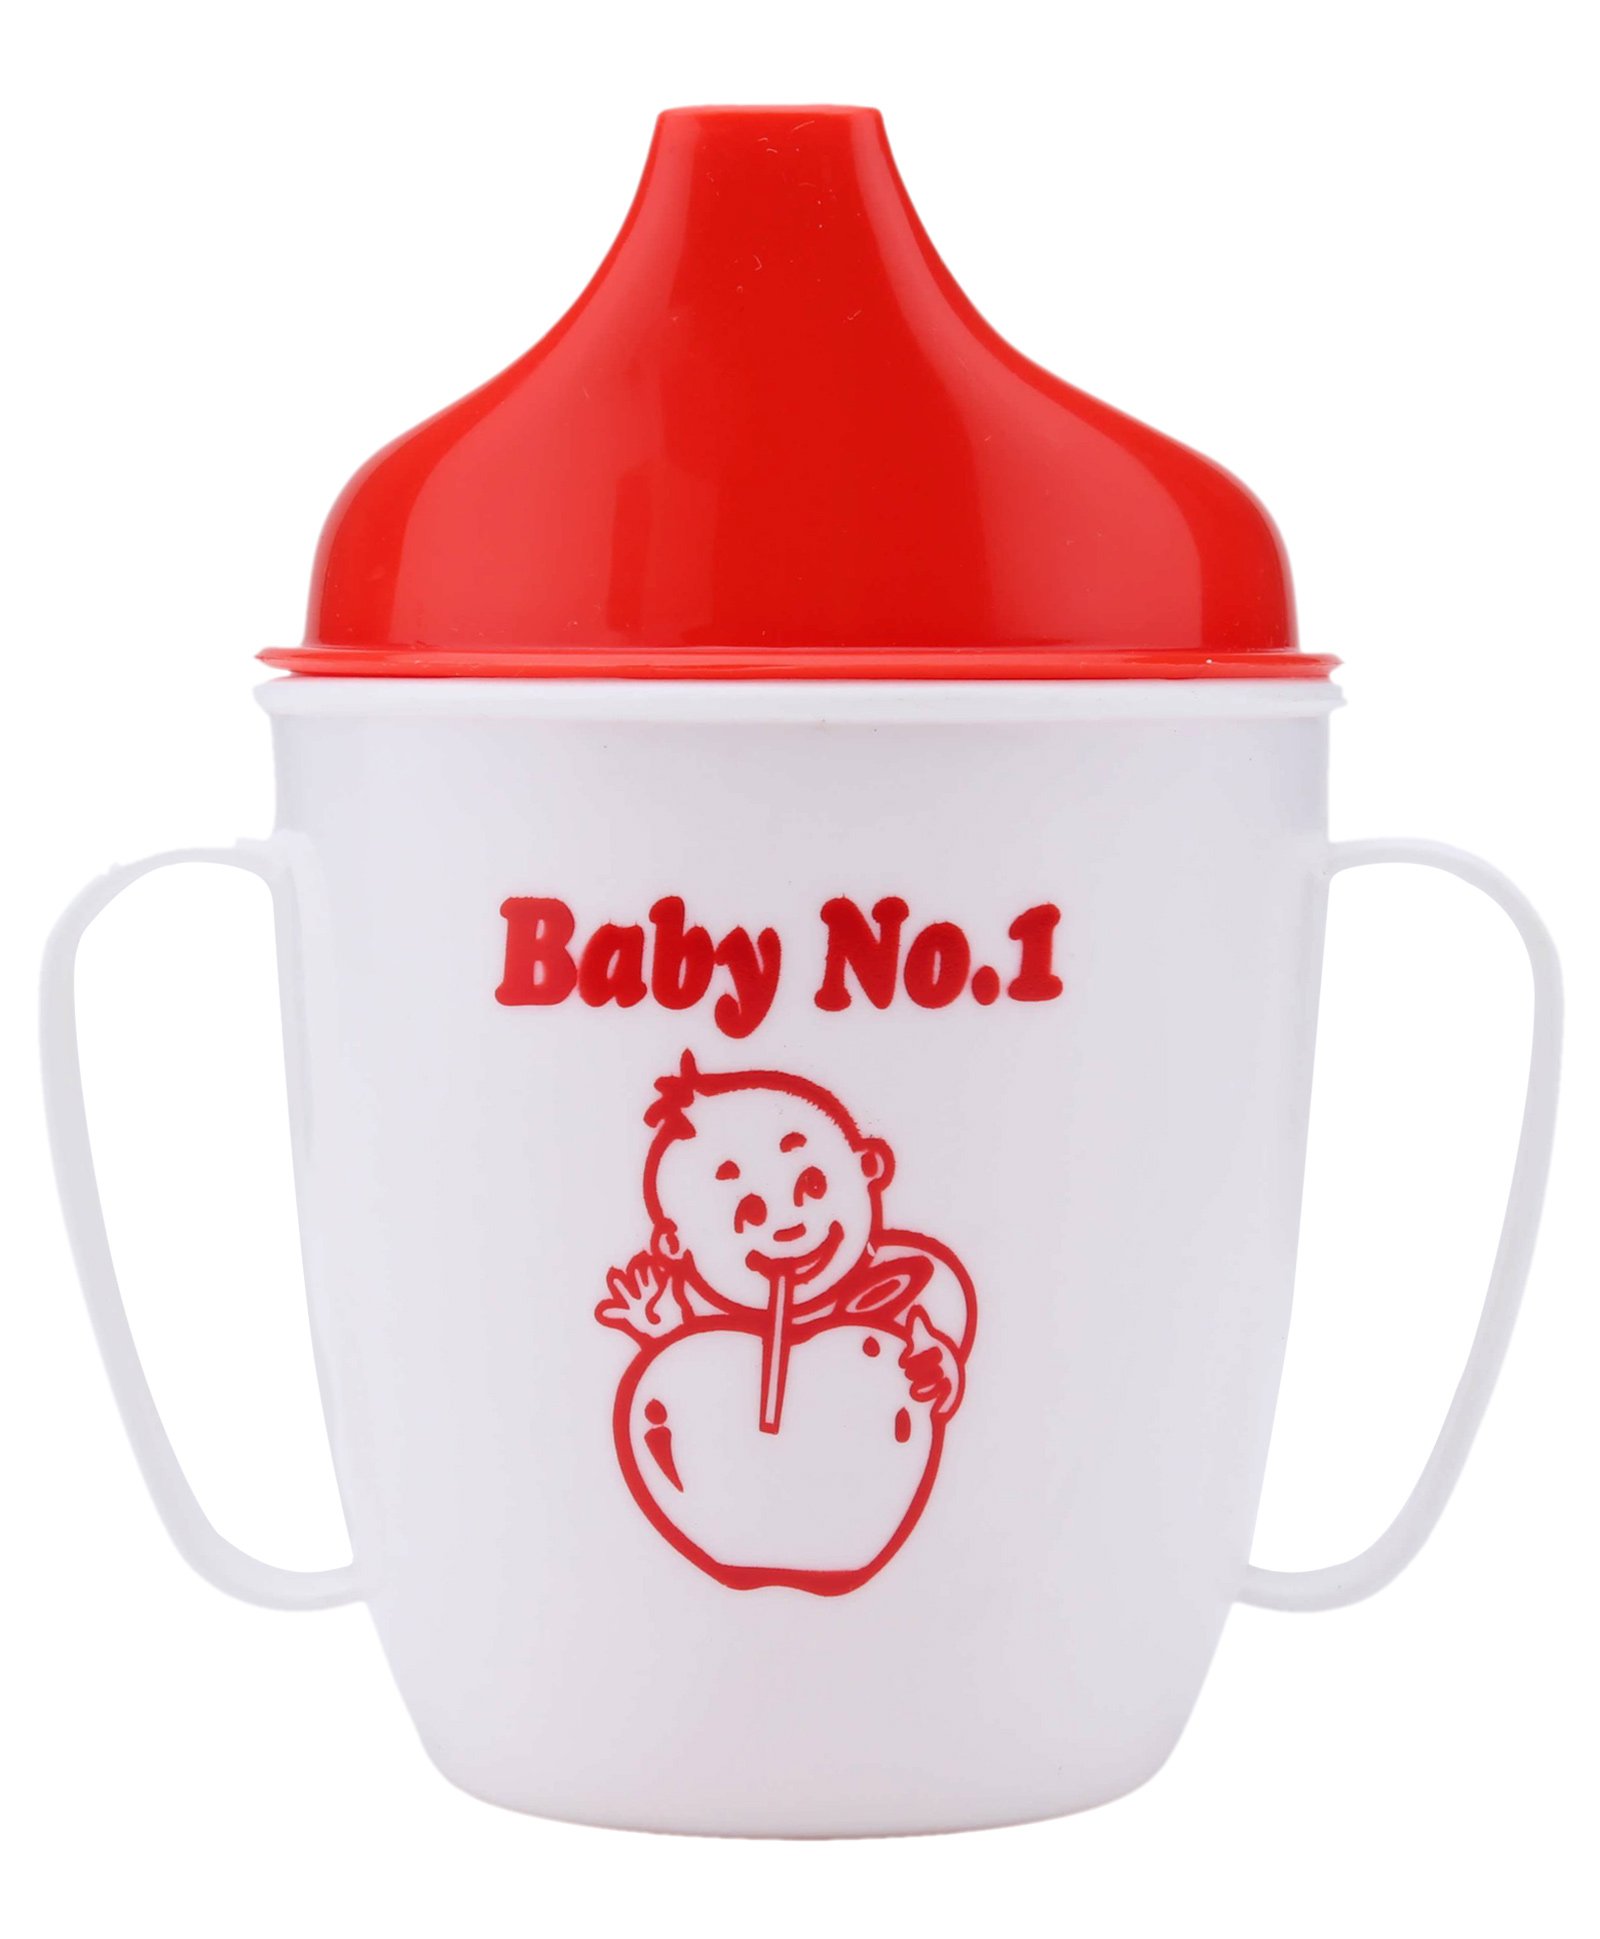 Baby No. 1 Ample Cup 2 in 1